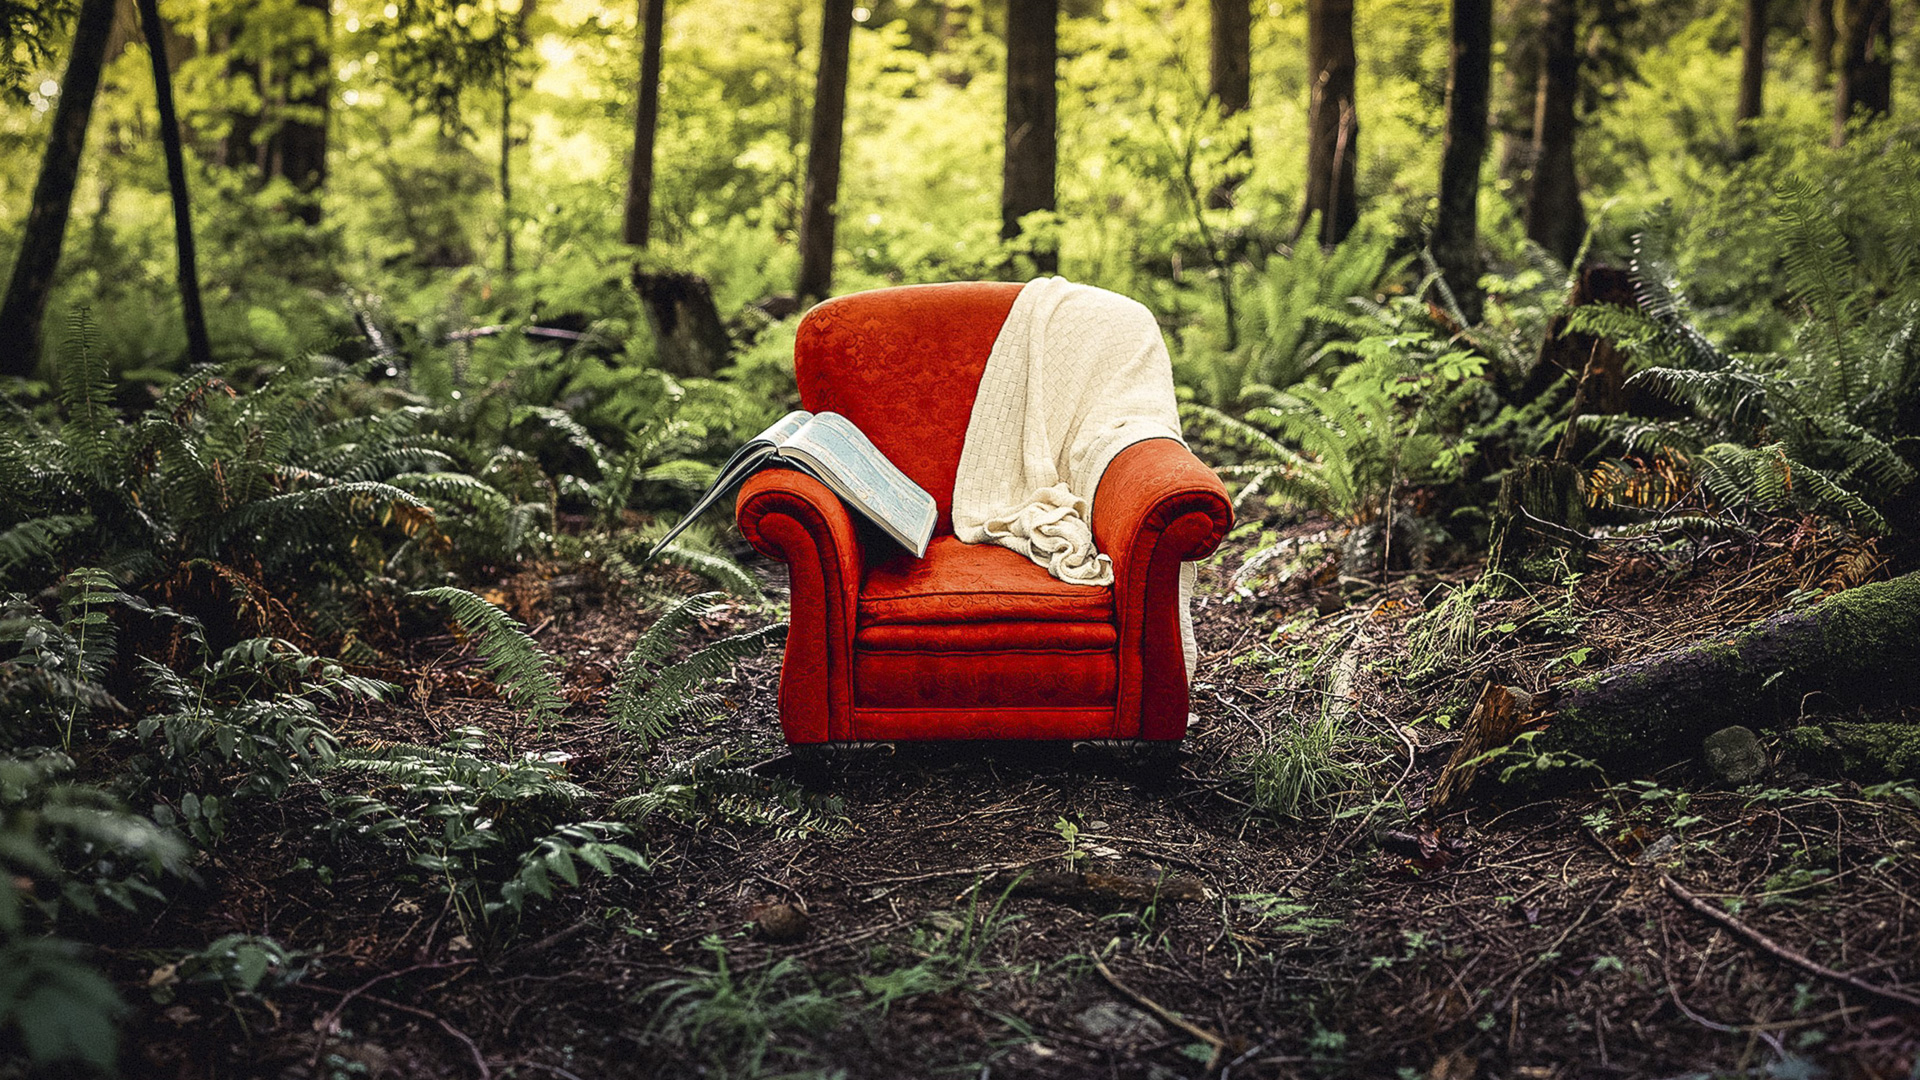 General 1920x1080 forest chair red leaves nature outdoors plants trees